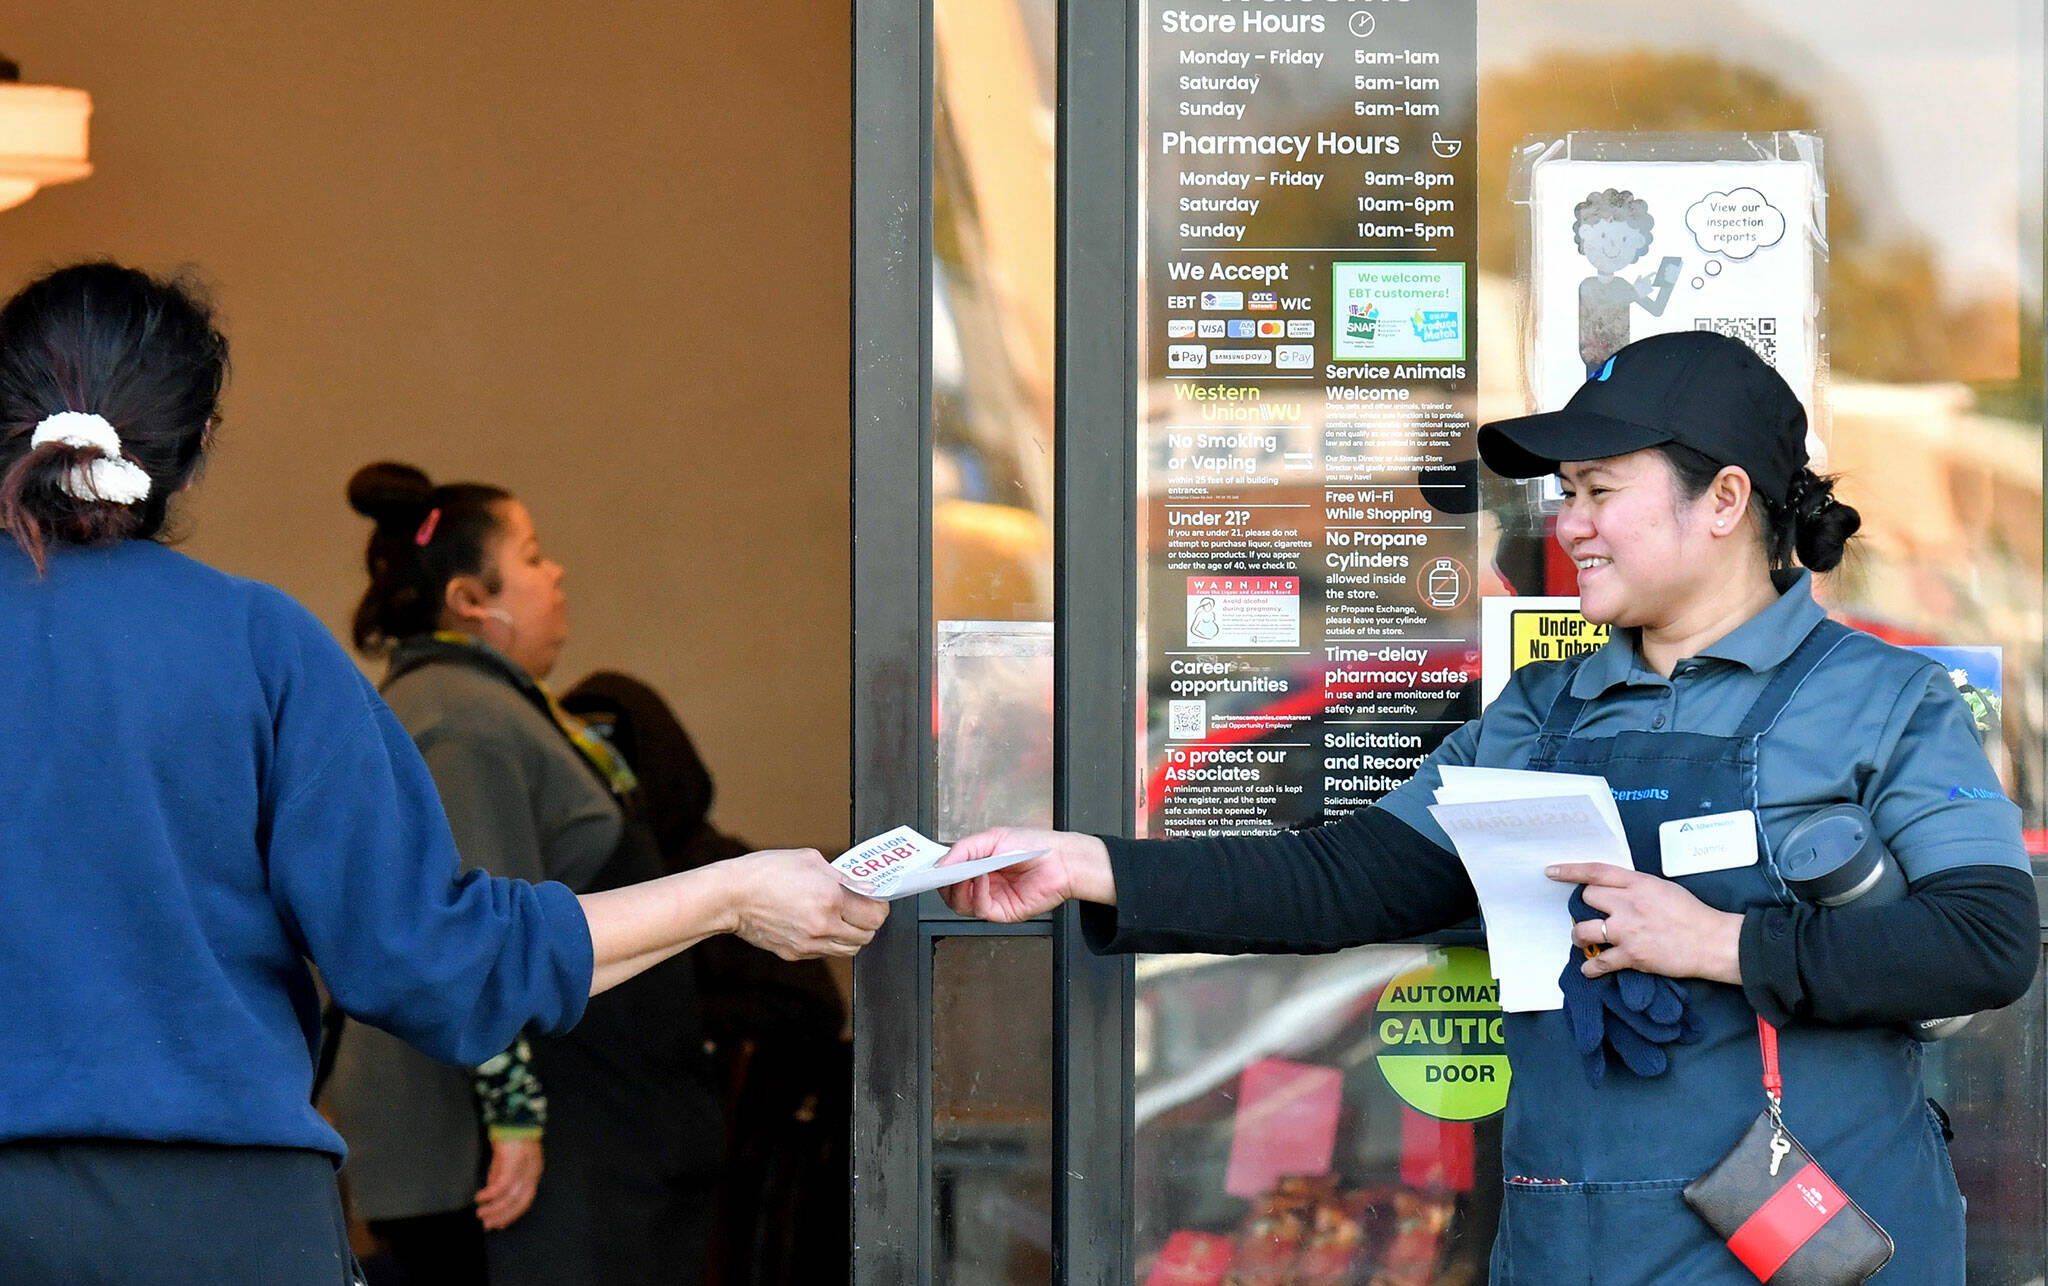 Joanne Fisher, right, a meat wrapper with the Marysville Albertsons, hands a leaflet to a shopper during an informational campaign on Wednesday. Fisher was one of less than a dozen grocery store workers handing out leaflets to shoppers about the proposed merger between Albertsons and Kroger. (Mike Henneke / The Herald)